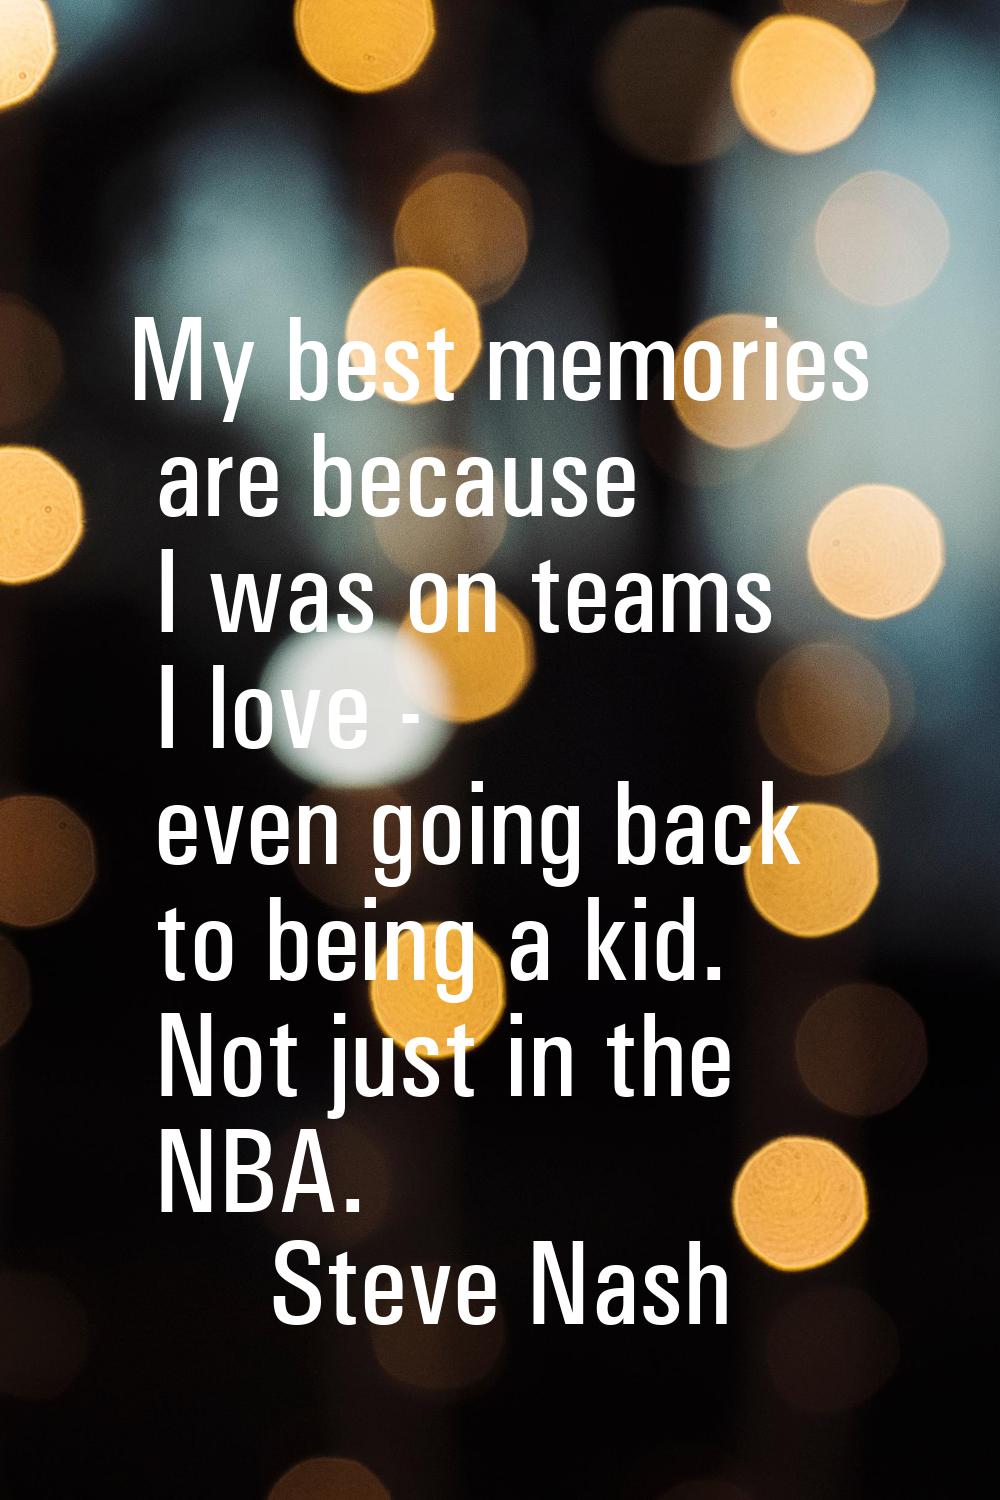 My best memories are because I was on teams I love - even going back to being a kid. Not just in th